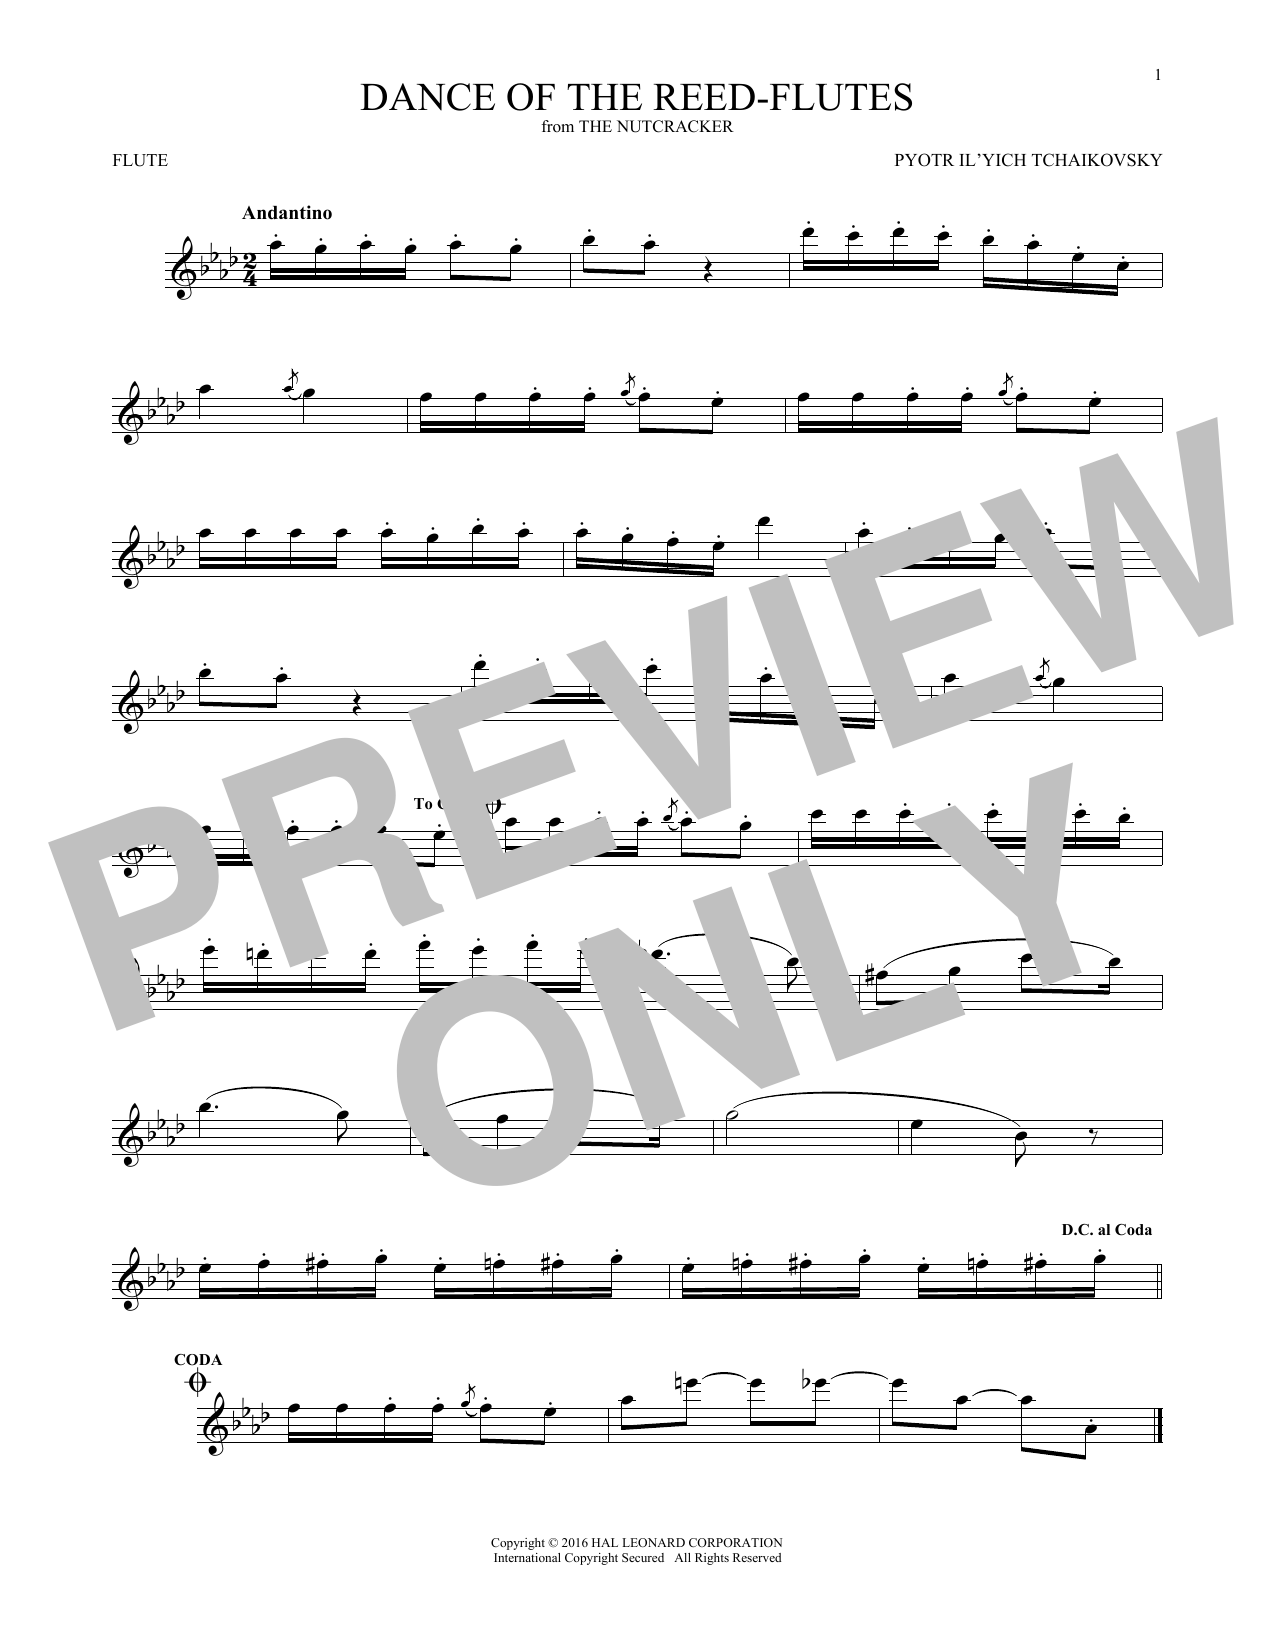 Download Pyotr Il'yich Tchaikovsky Dance Of The Reed Flutes, Op. 71a Sheet Music